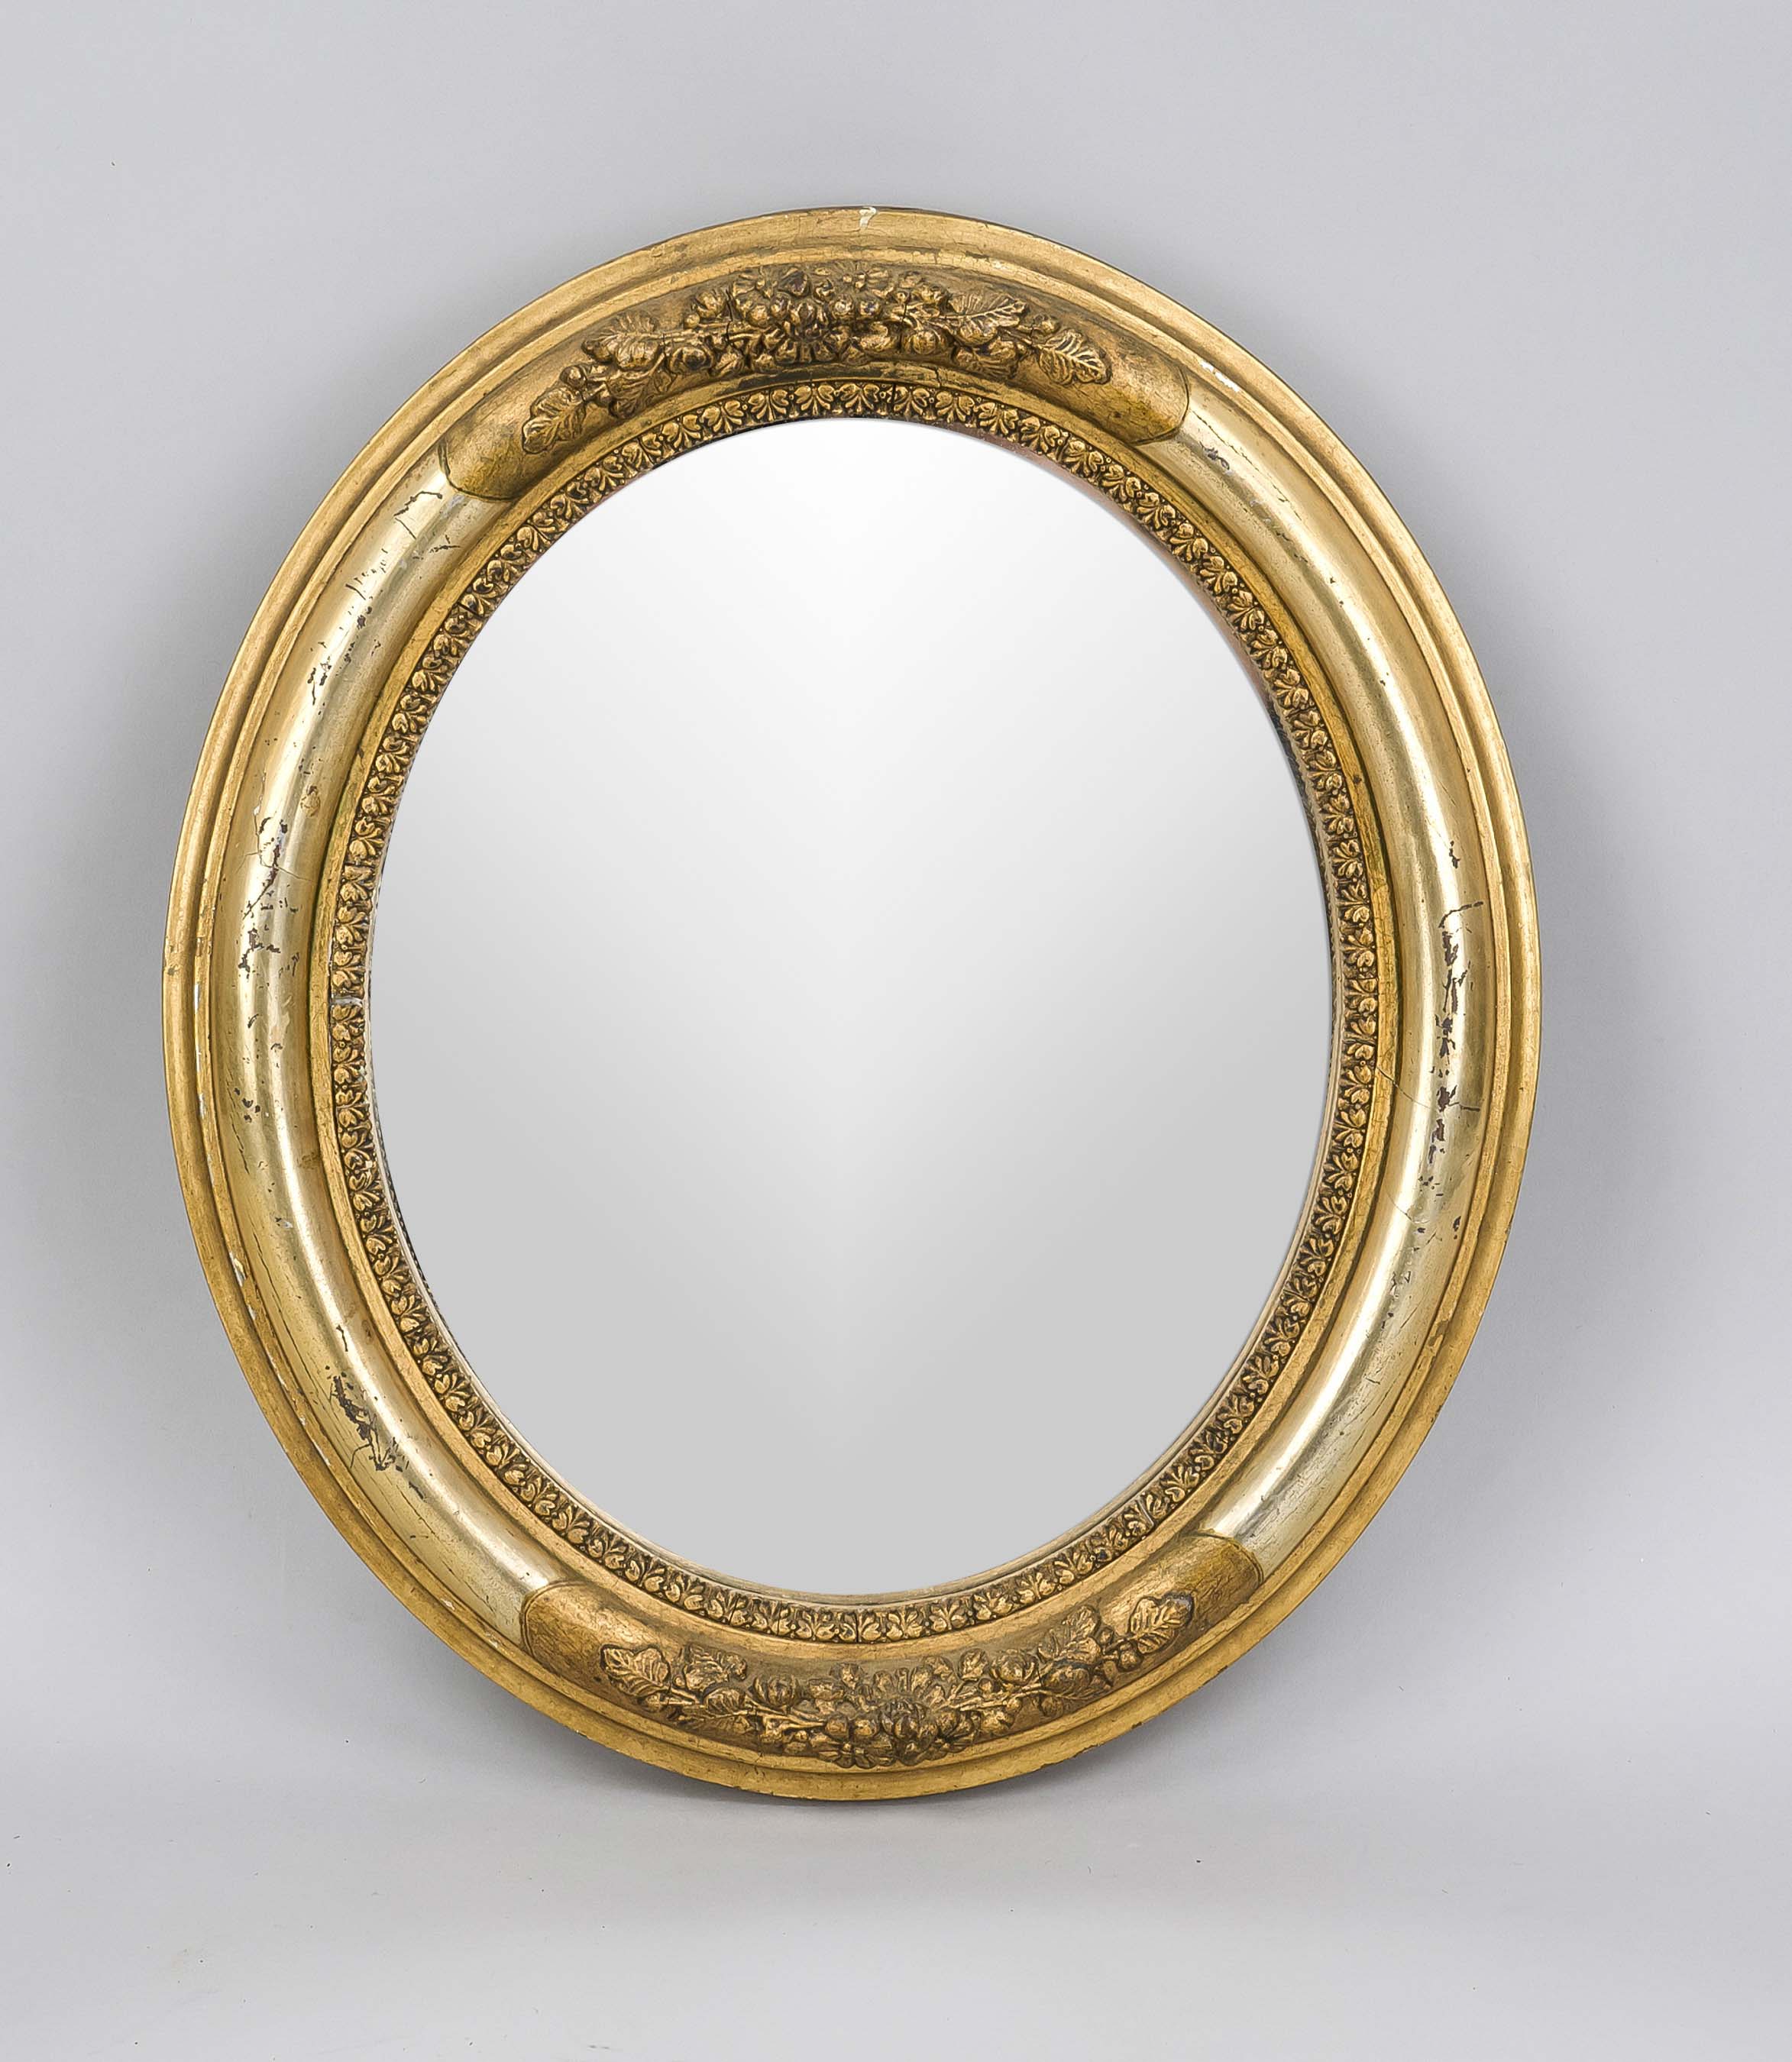 Mirror, 19th/20th century, oval wooden frame with sculpted floral decoration, gold painted,